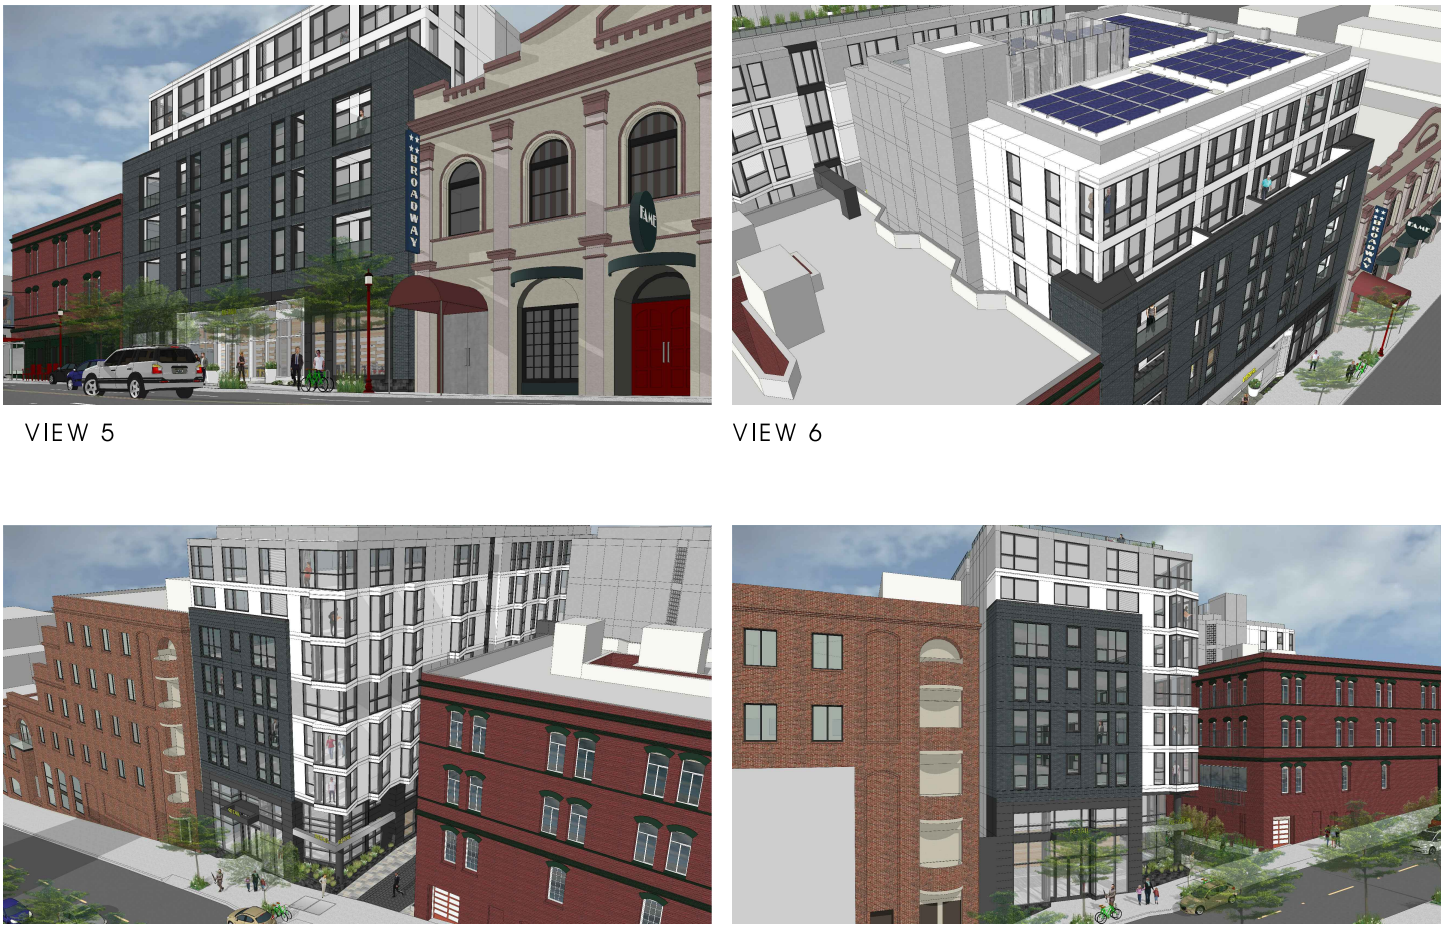 Four architectural renderings of a modern multistory building with traditional surrounding structures.